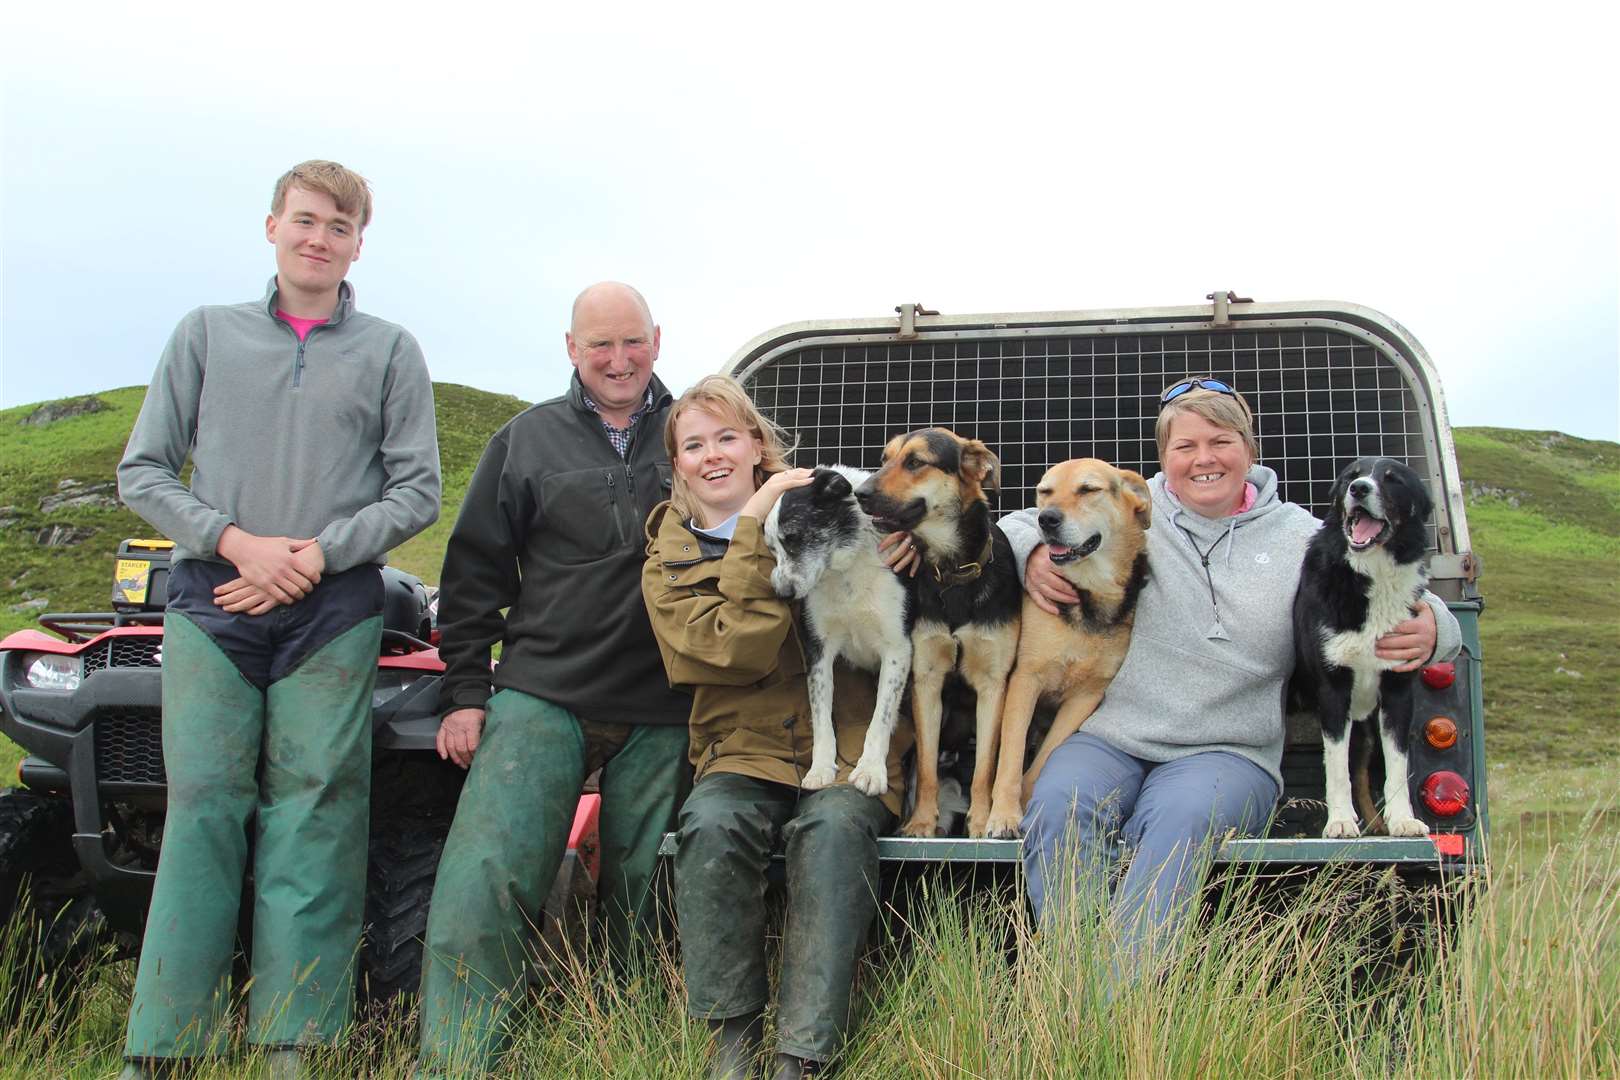 Joyce (right) during filming of This Farming Life, along with her nephew Mure (left), husband Ian and niece Frances, as well as the farm dogs. Each episode features the highs and lows of six farming families as they strive to future-proof their businesses, raise strong, healthy stock and safeguard their farms for the next generation. Picture: Caroline Jones